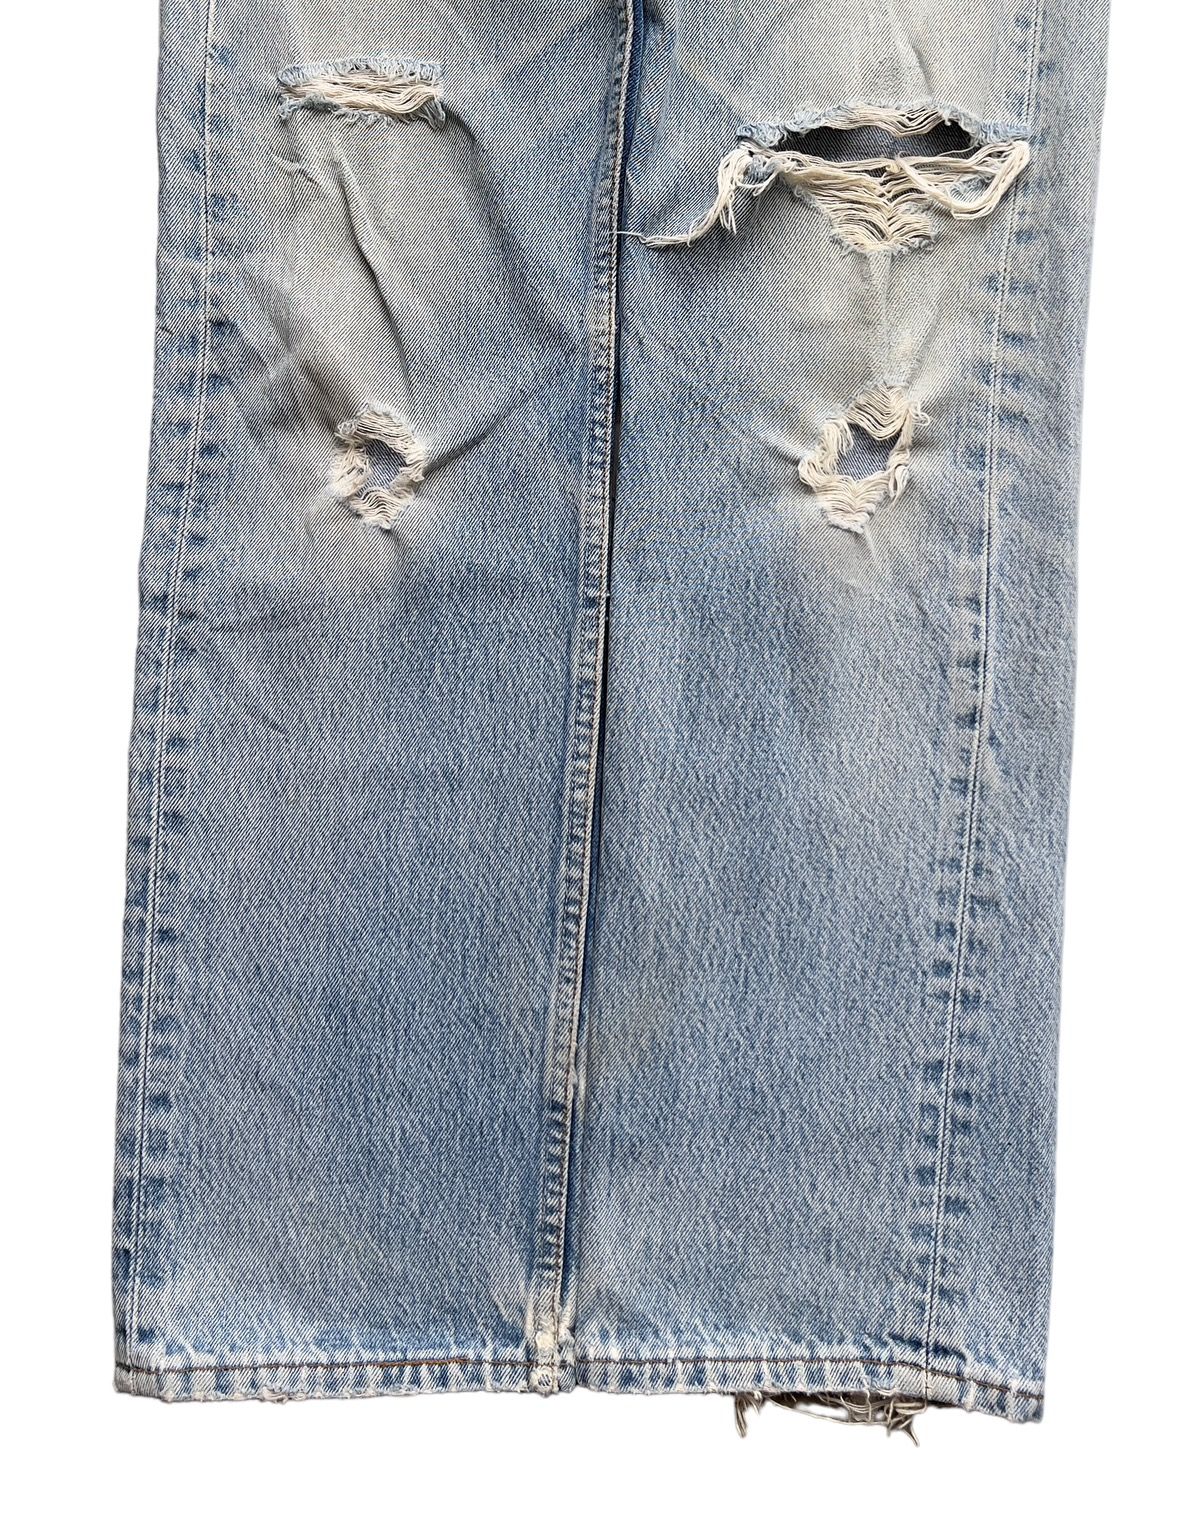 Vintage 90s Levis Distressed Ripped Acid Wash Jeans 31x32 - 4